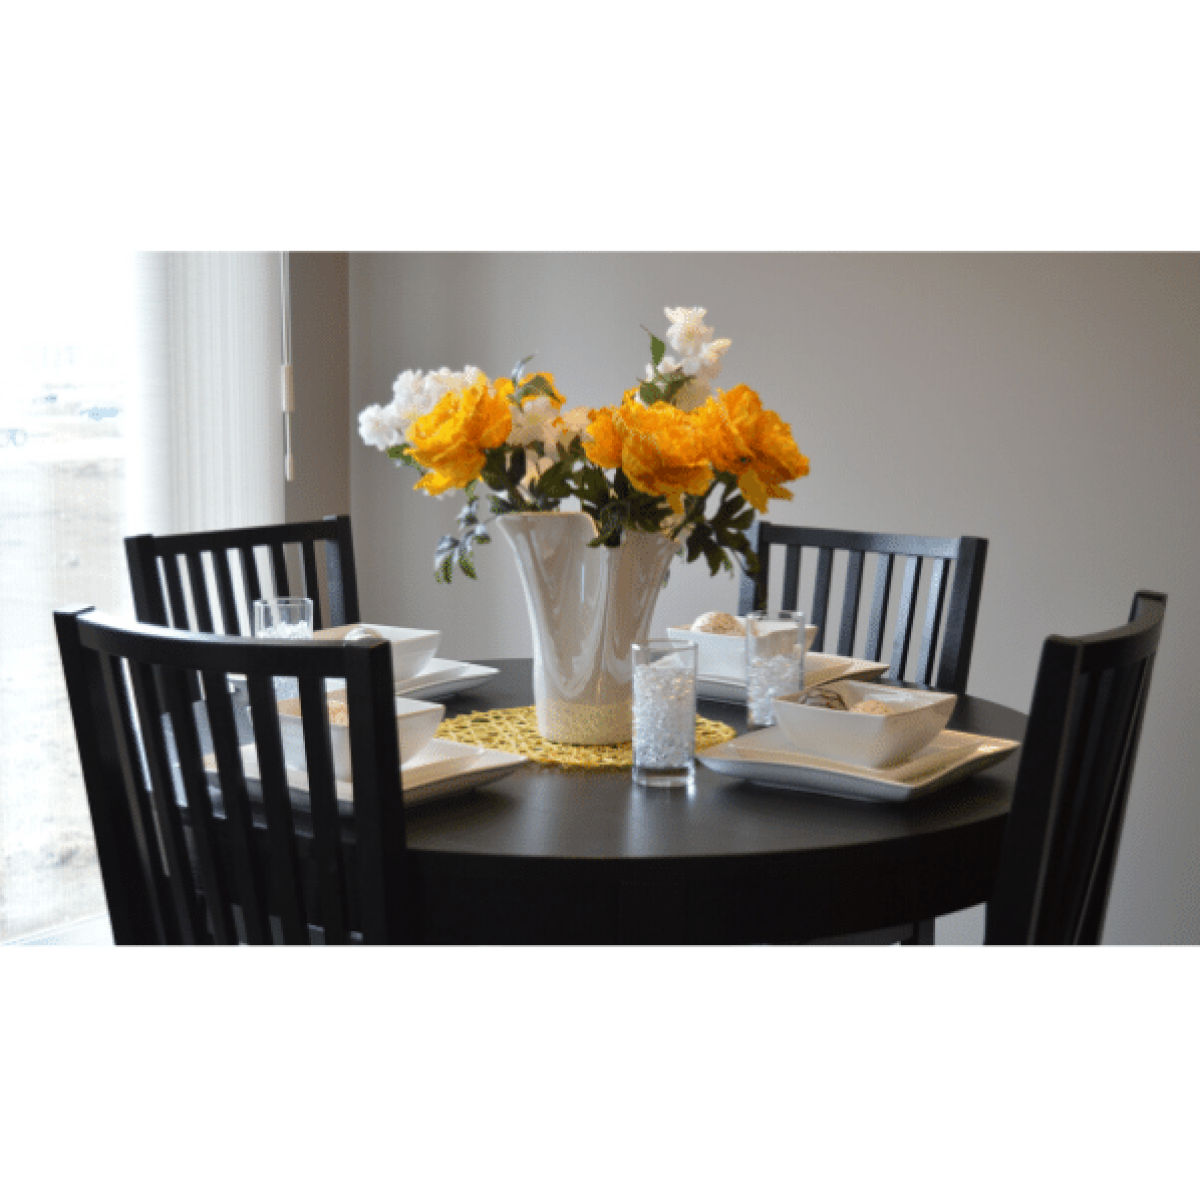 How to Choose the Right Dining Table for Your Condo | Condo Living